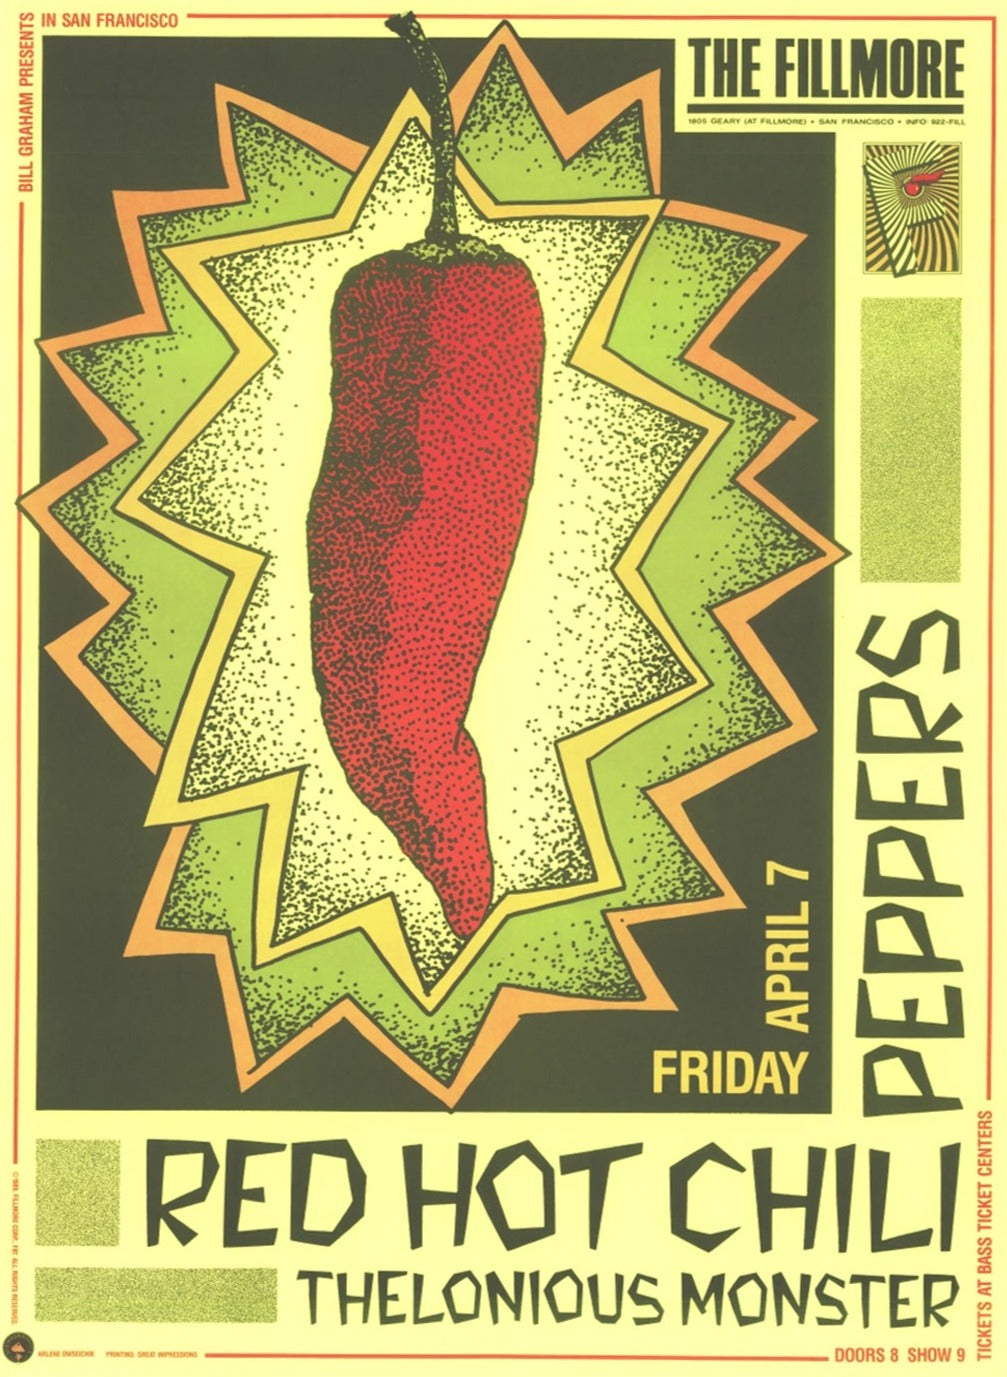 Red Hot Chili Peppers - The Fillmore